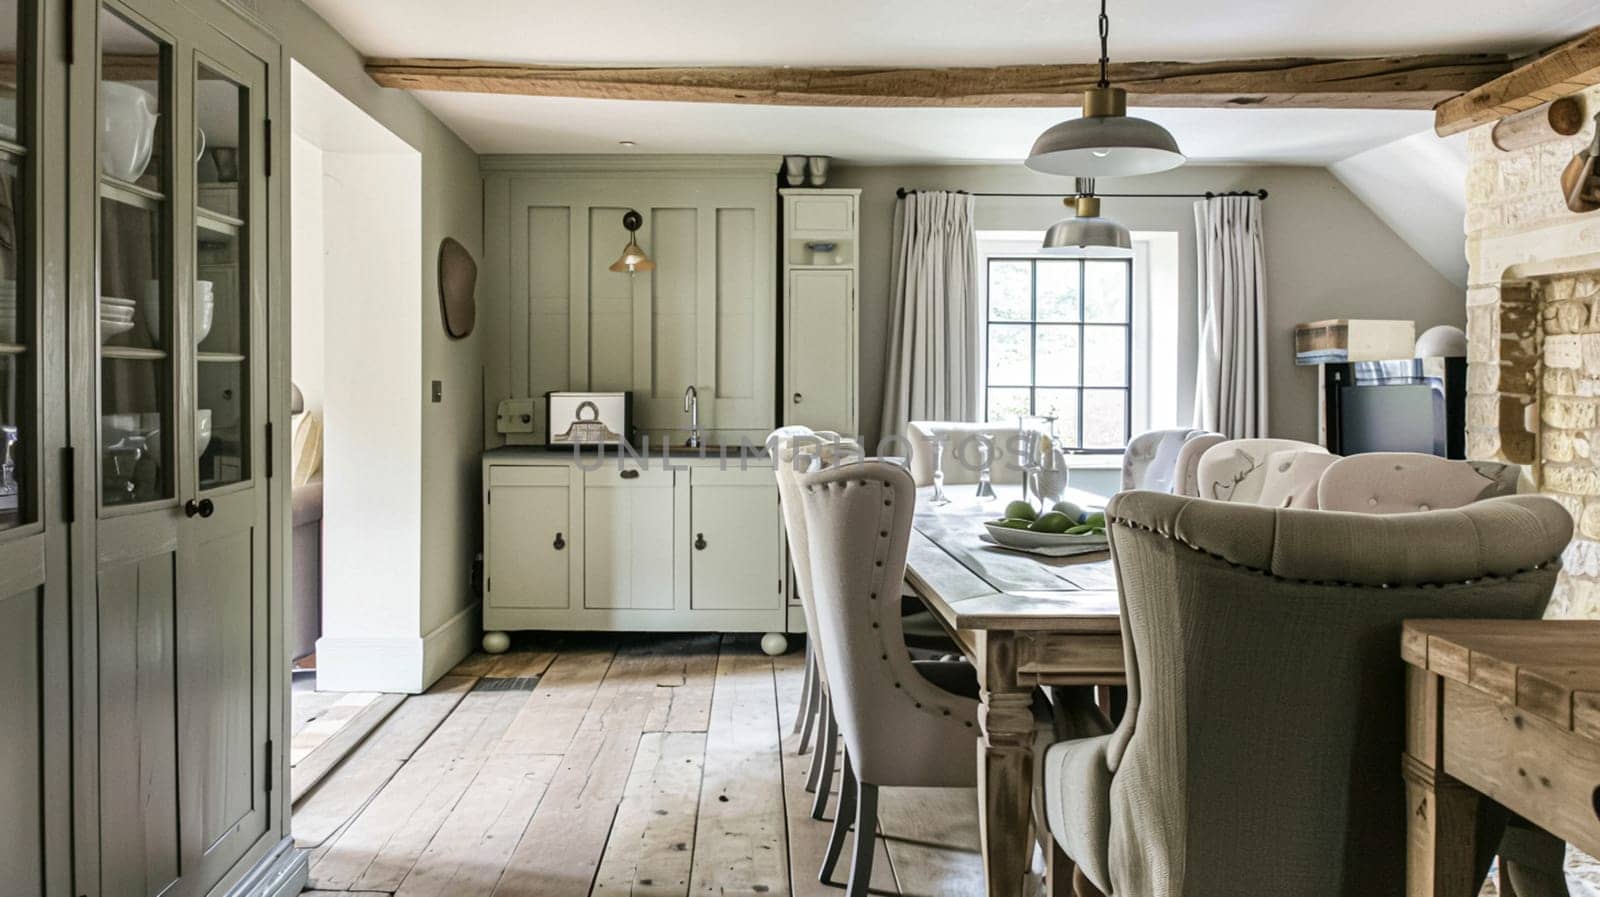 Cotswolds cottage style dining room decor, interior design and country house furniture, home decor, table and chairs, English countryside styling